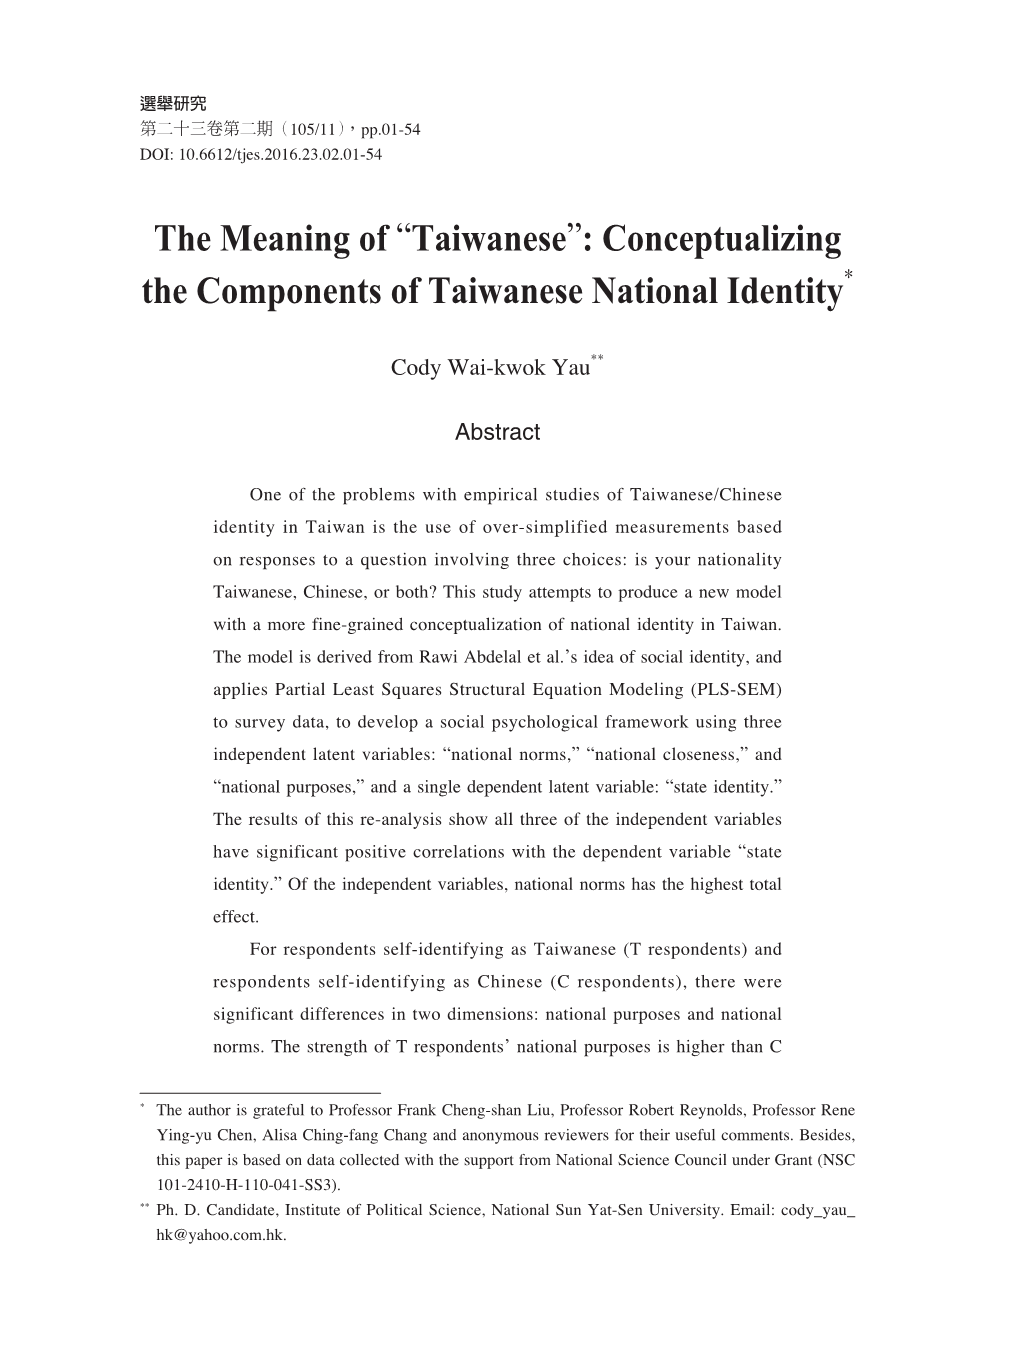 Taiwanese”: Conceptualizing the Components of Taiwanese National Identity*